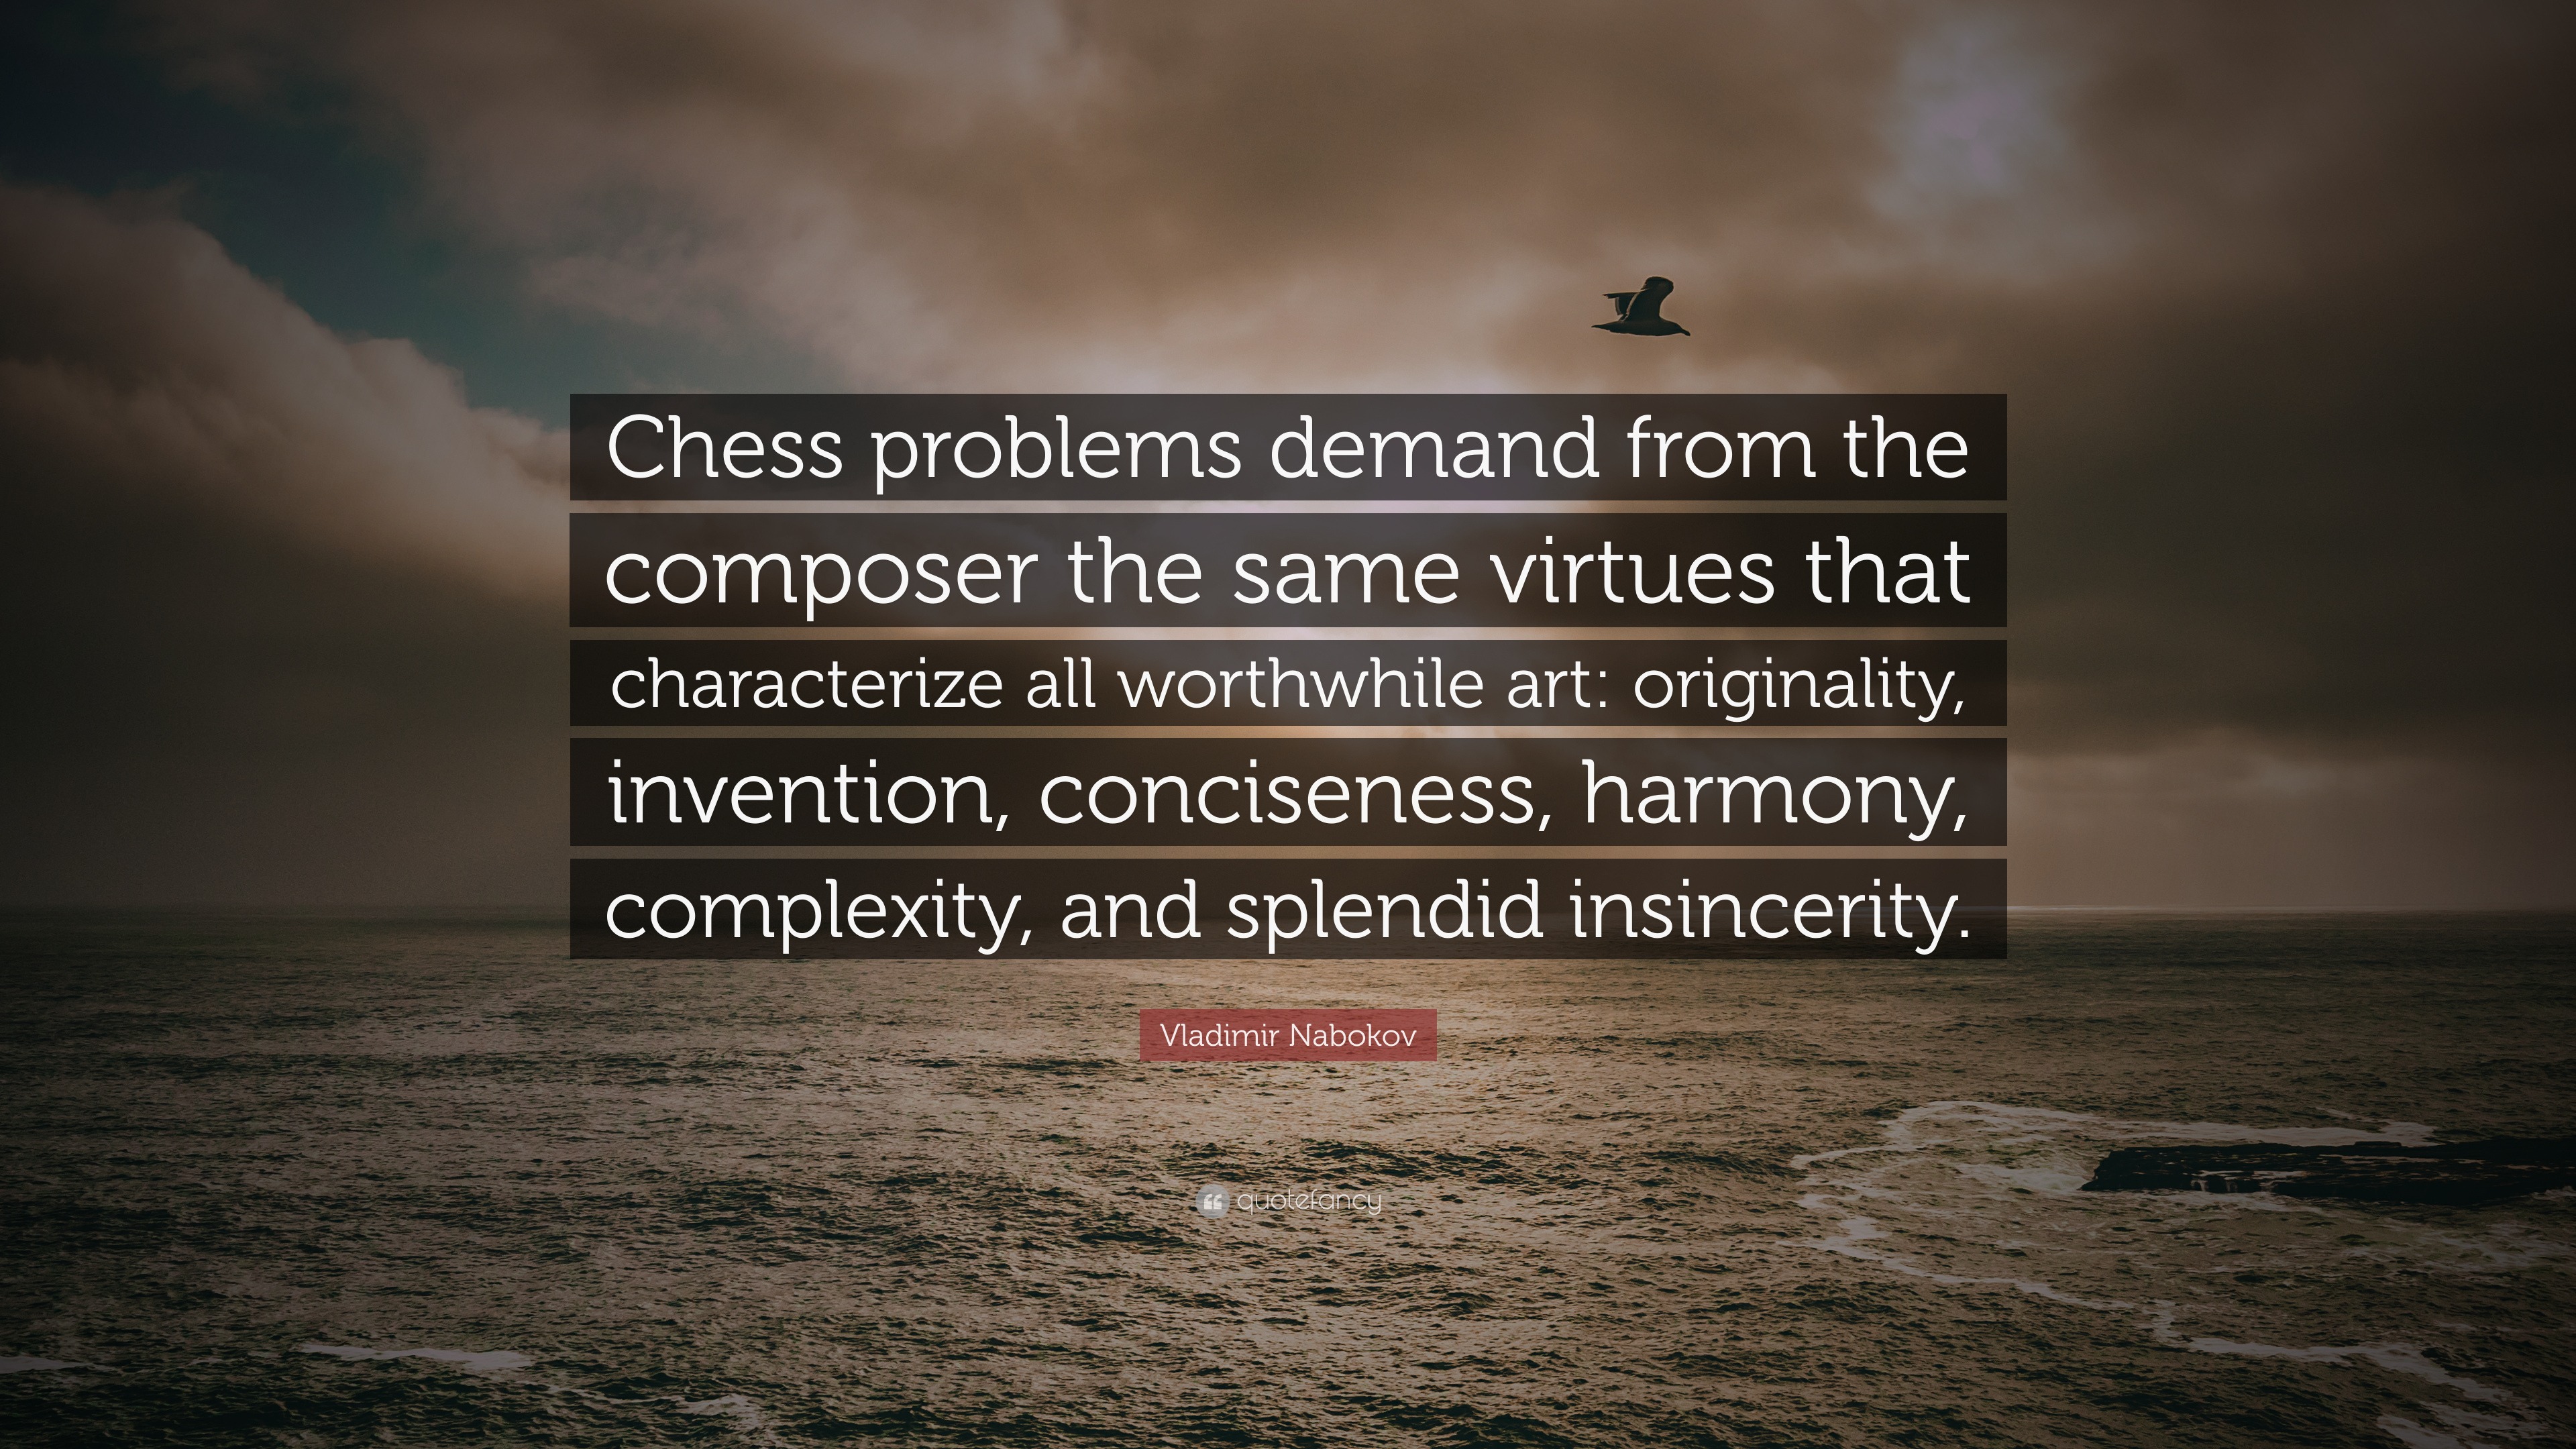 Vladimir Nabokov Quote Chess Problems Demand From The Composer